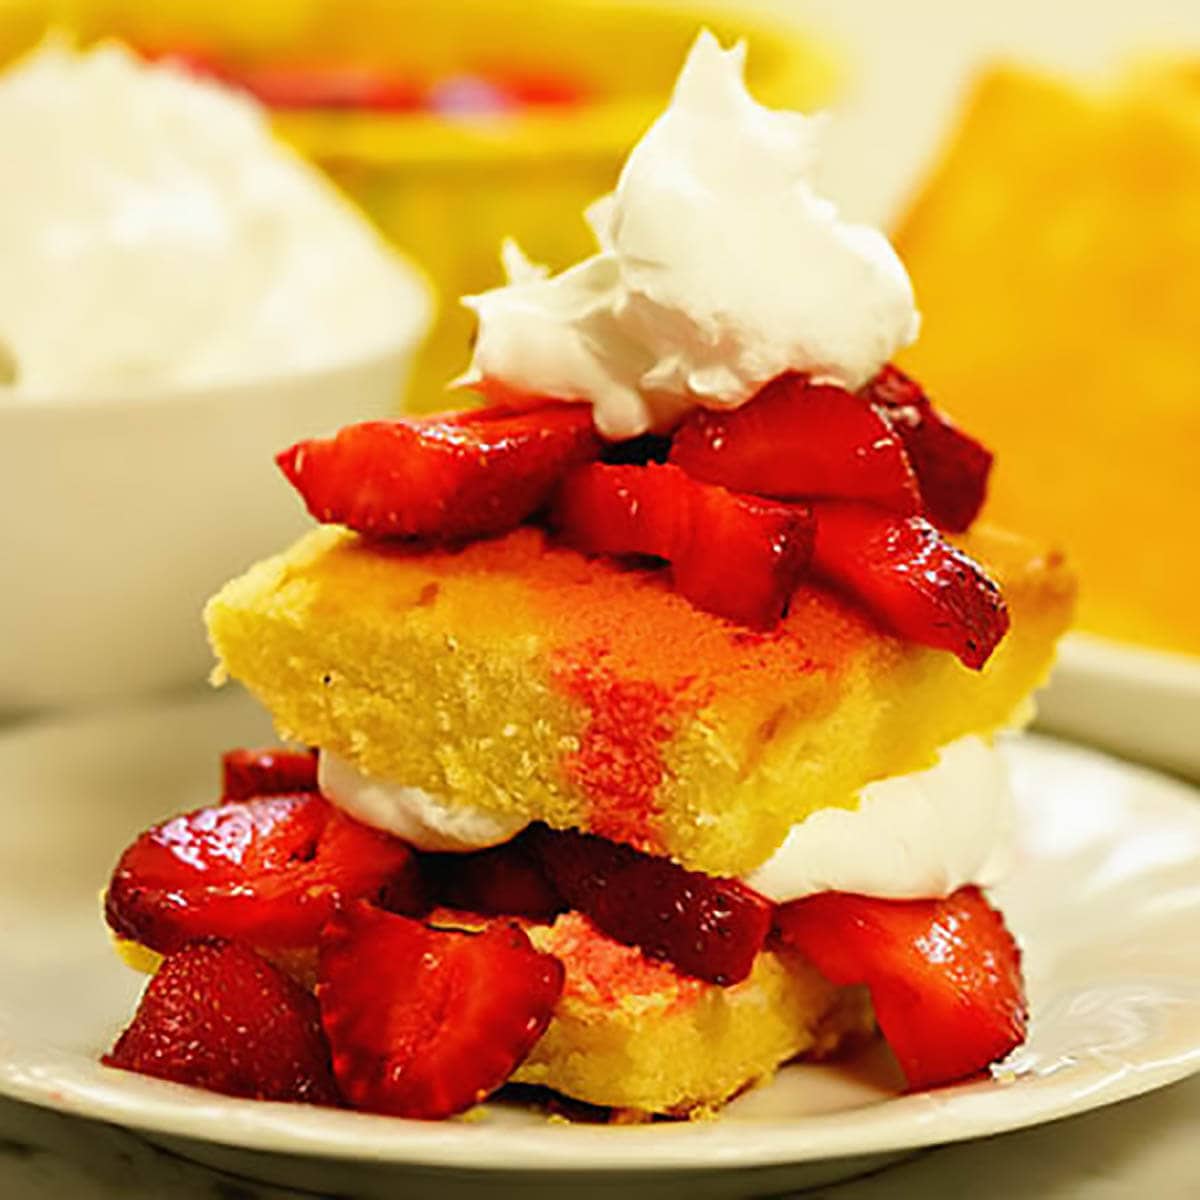 Shortcake layered with strawberries and whipped cream.